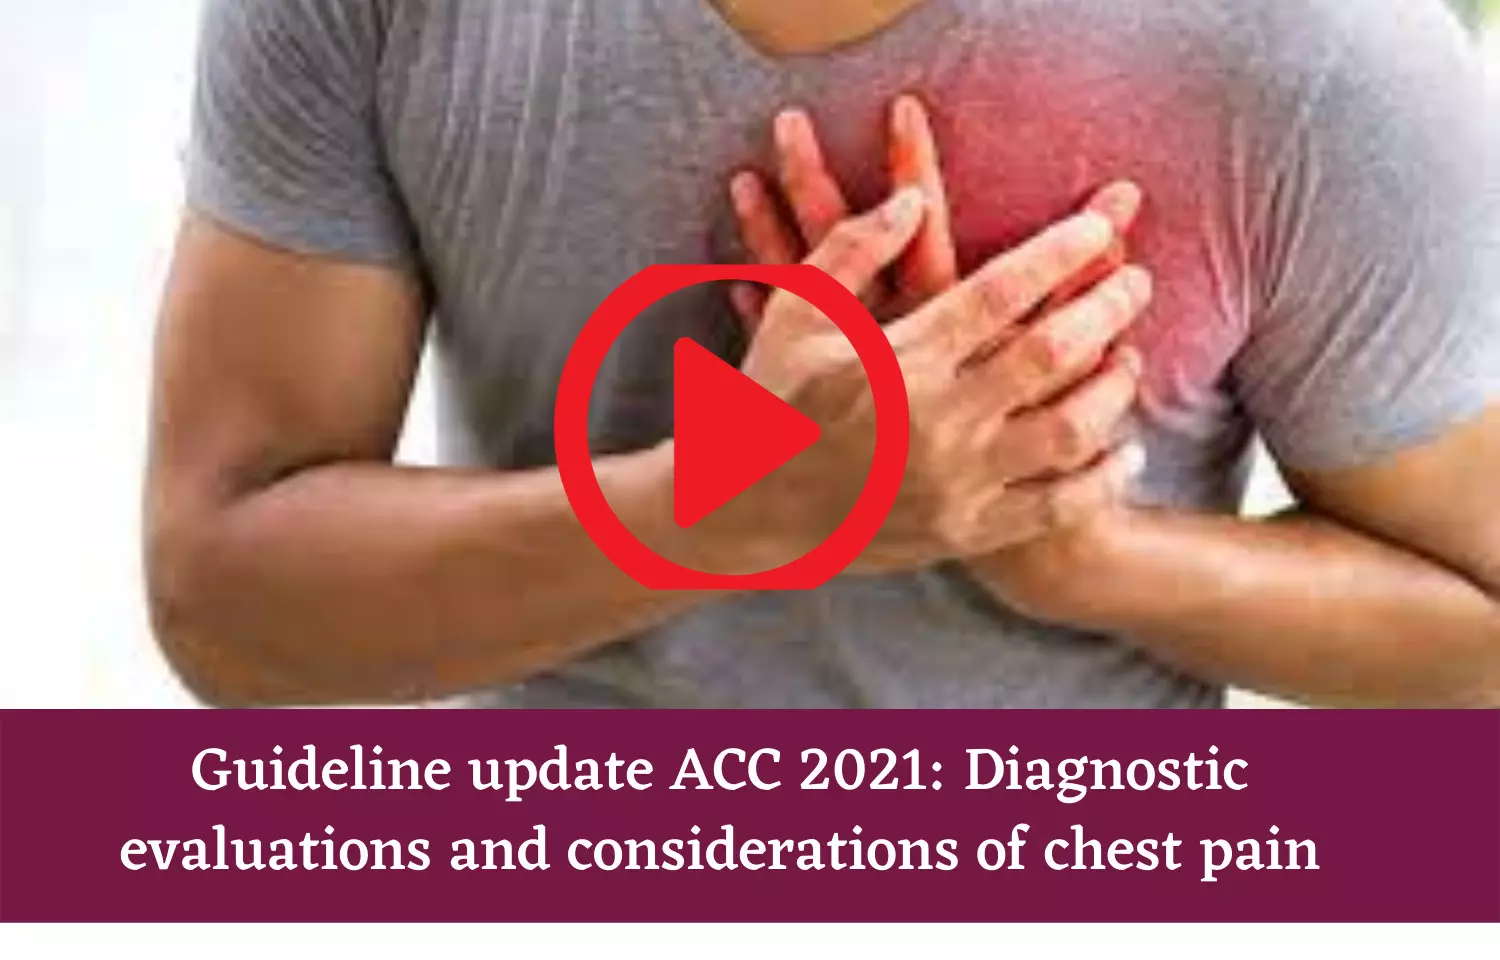 Guideline update ACC 2021: Diagnostic evaluations and considerations of chest pain